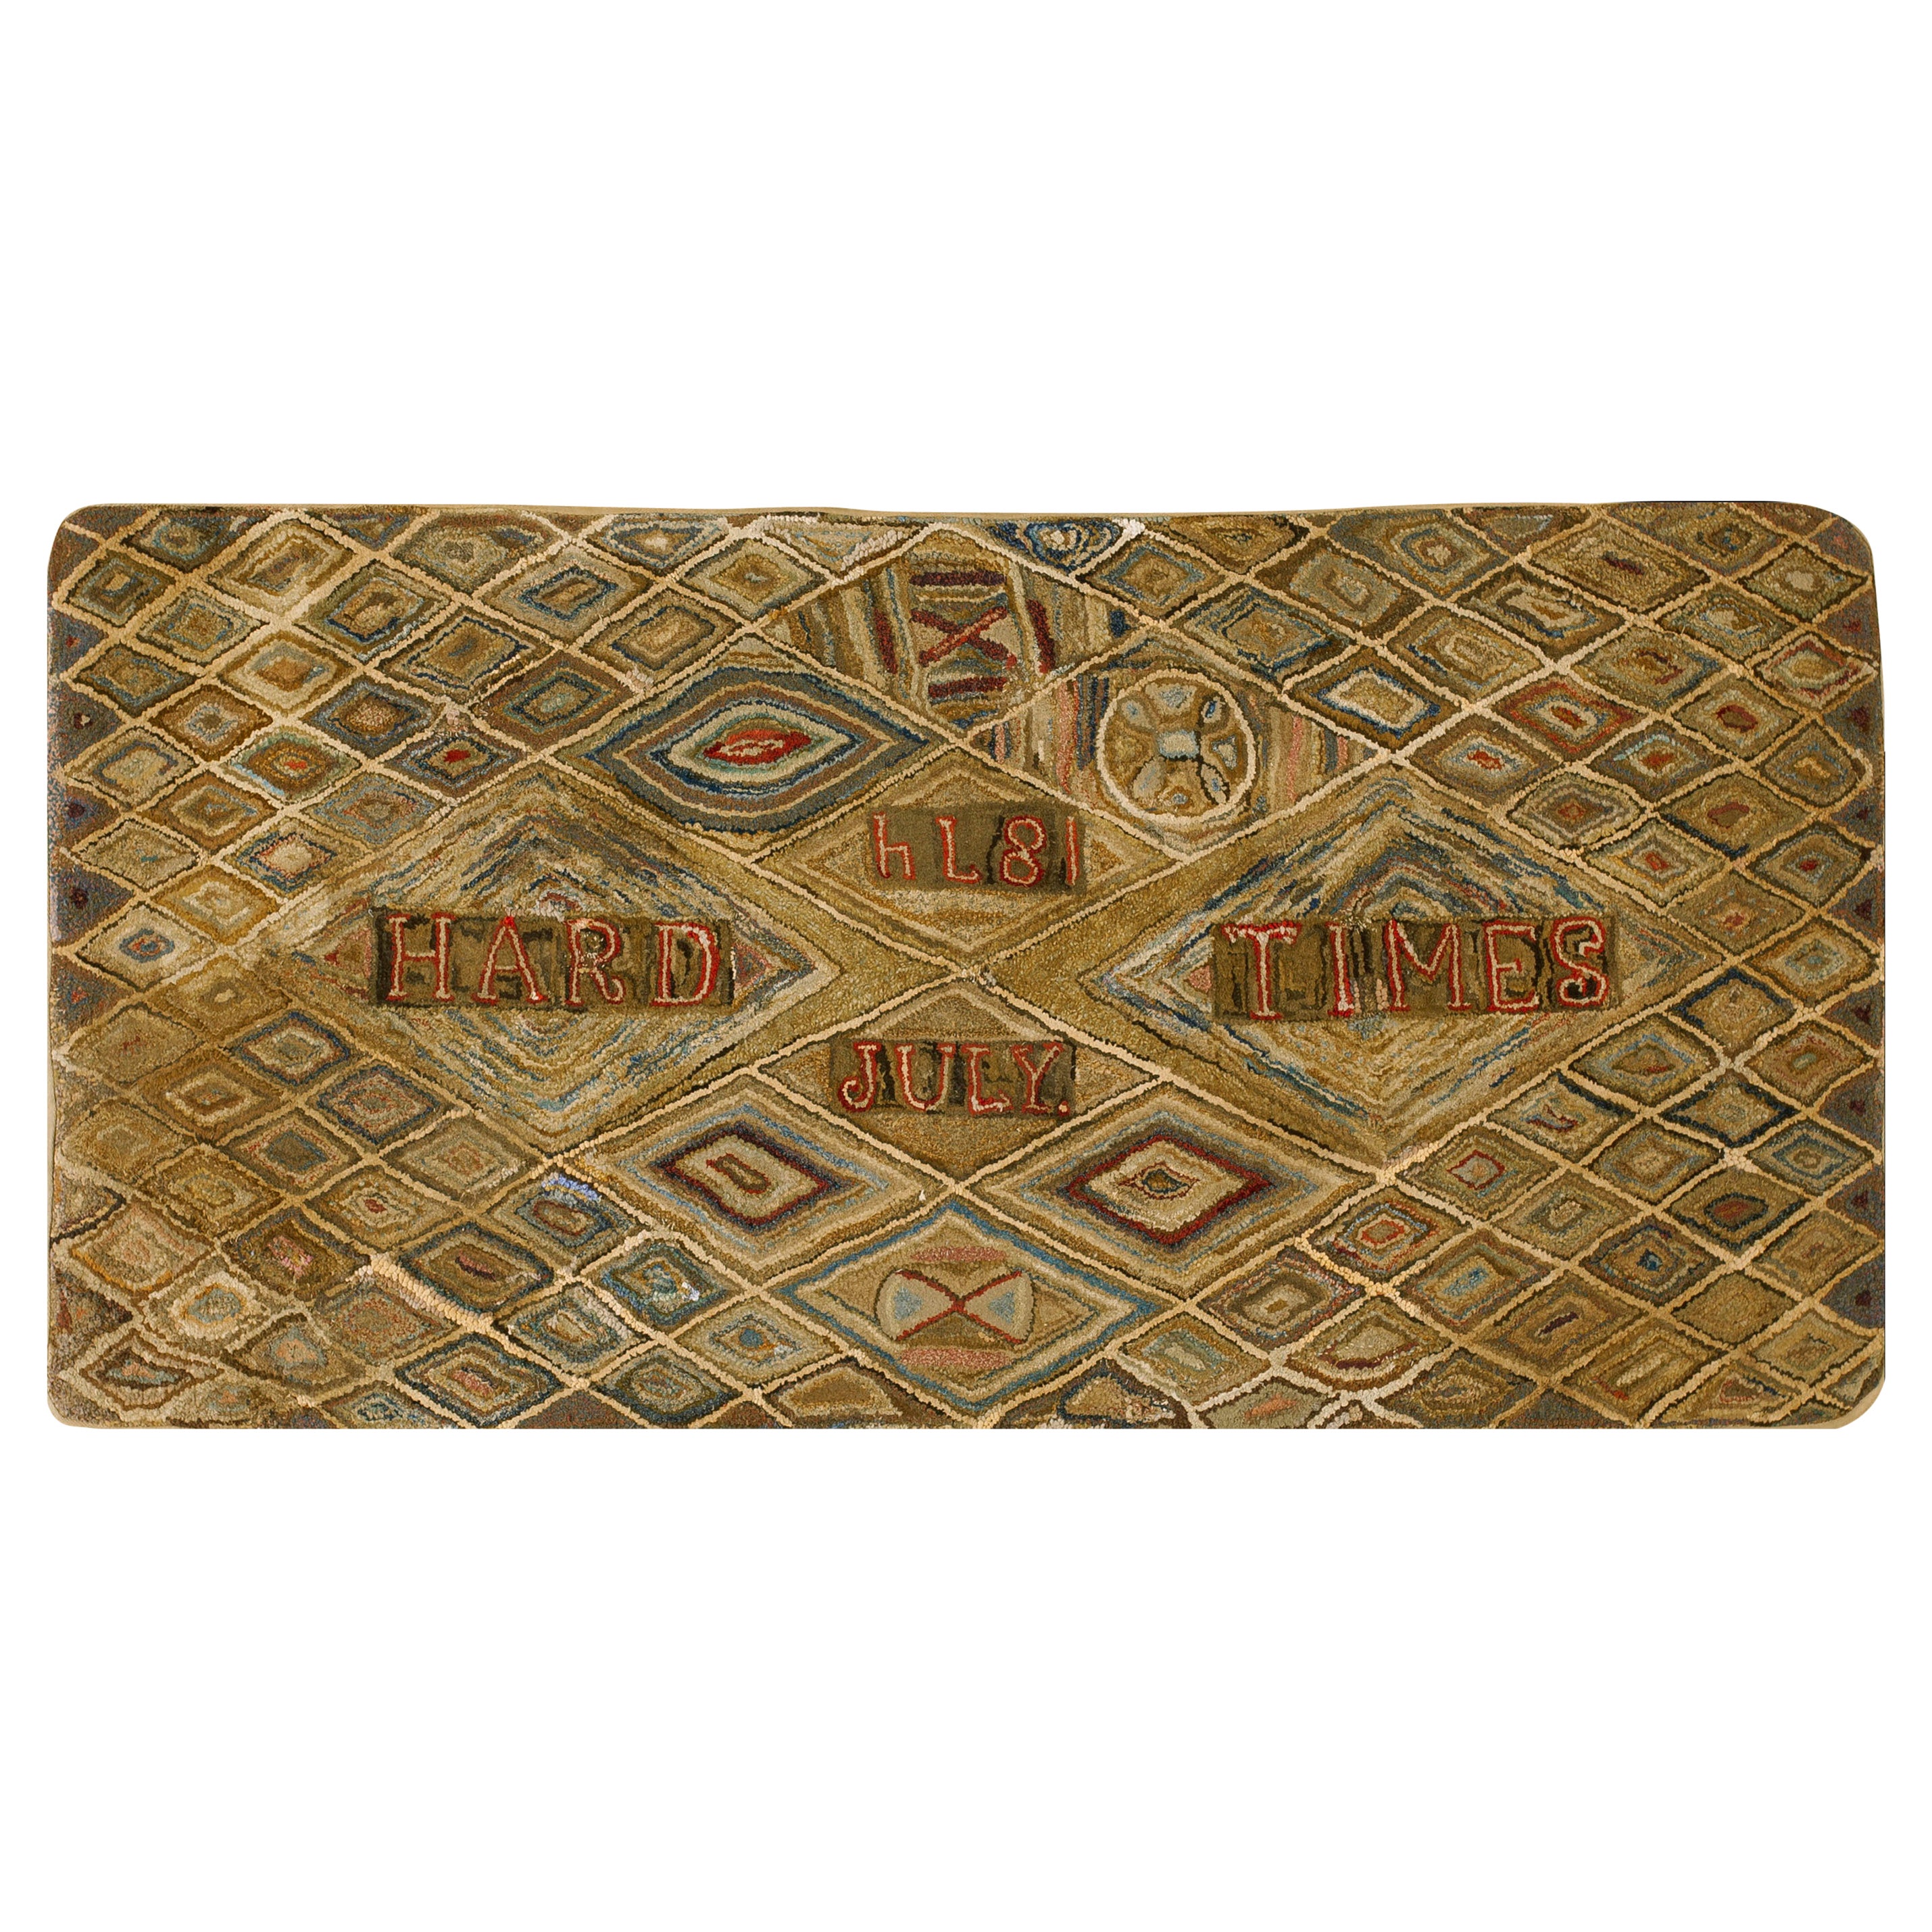 American Hooked Rug From 1870s ( 3'1" x 6'1" - 94 x 185 cm ) For Sale